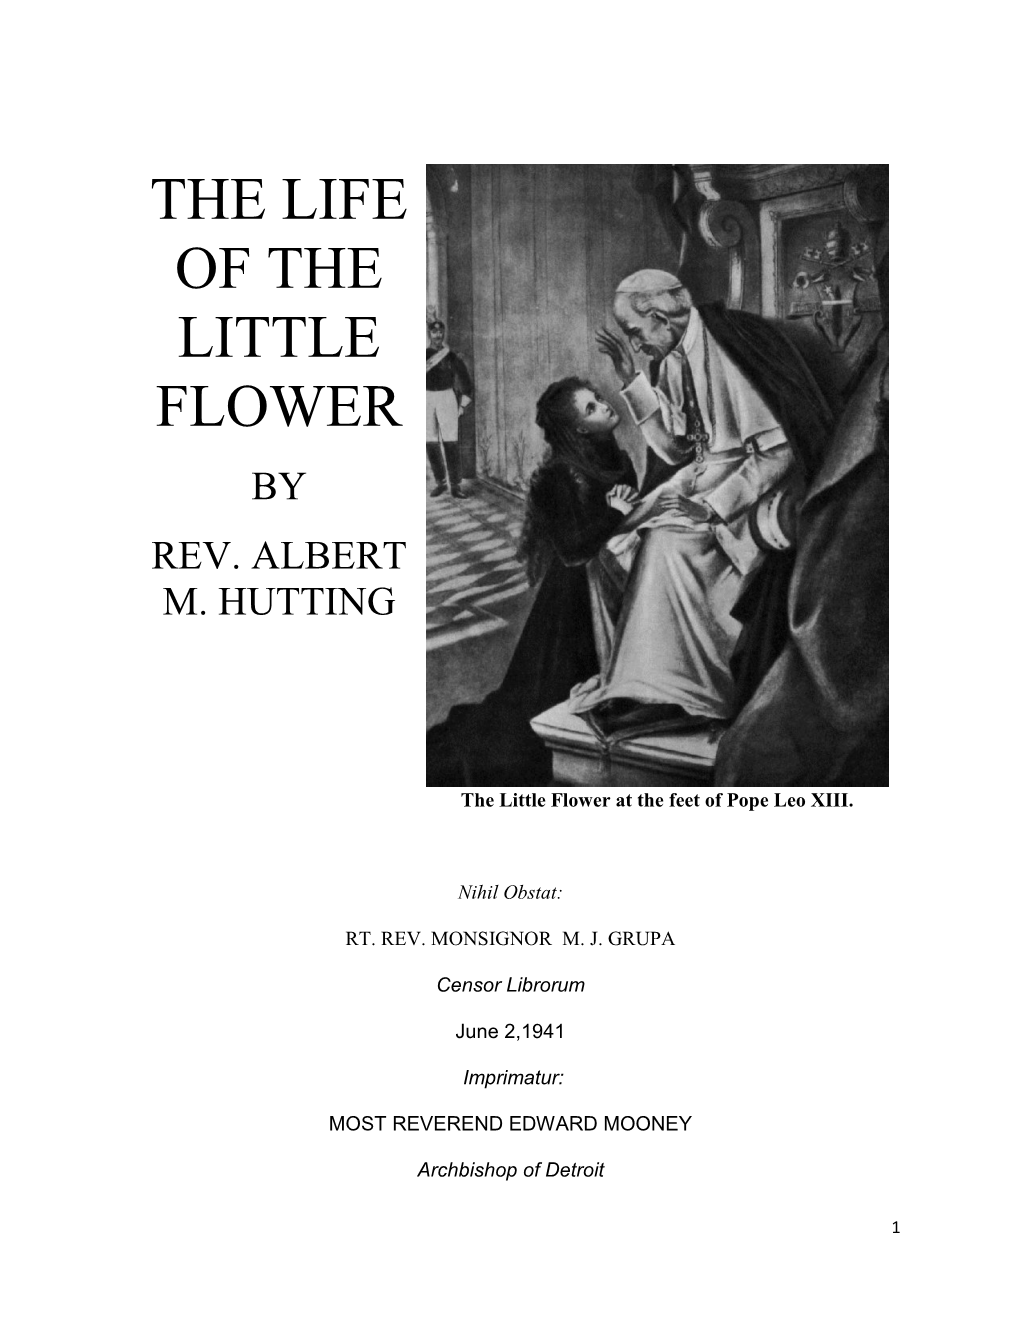 The Life of the Little Flower by Rev